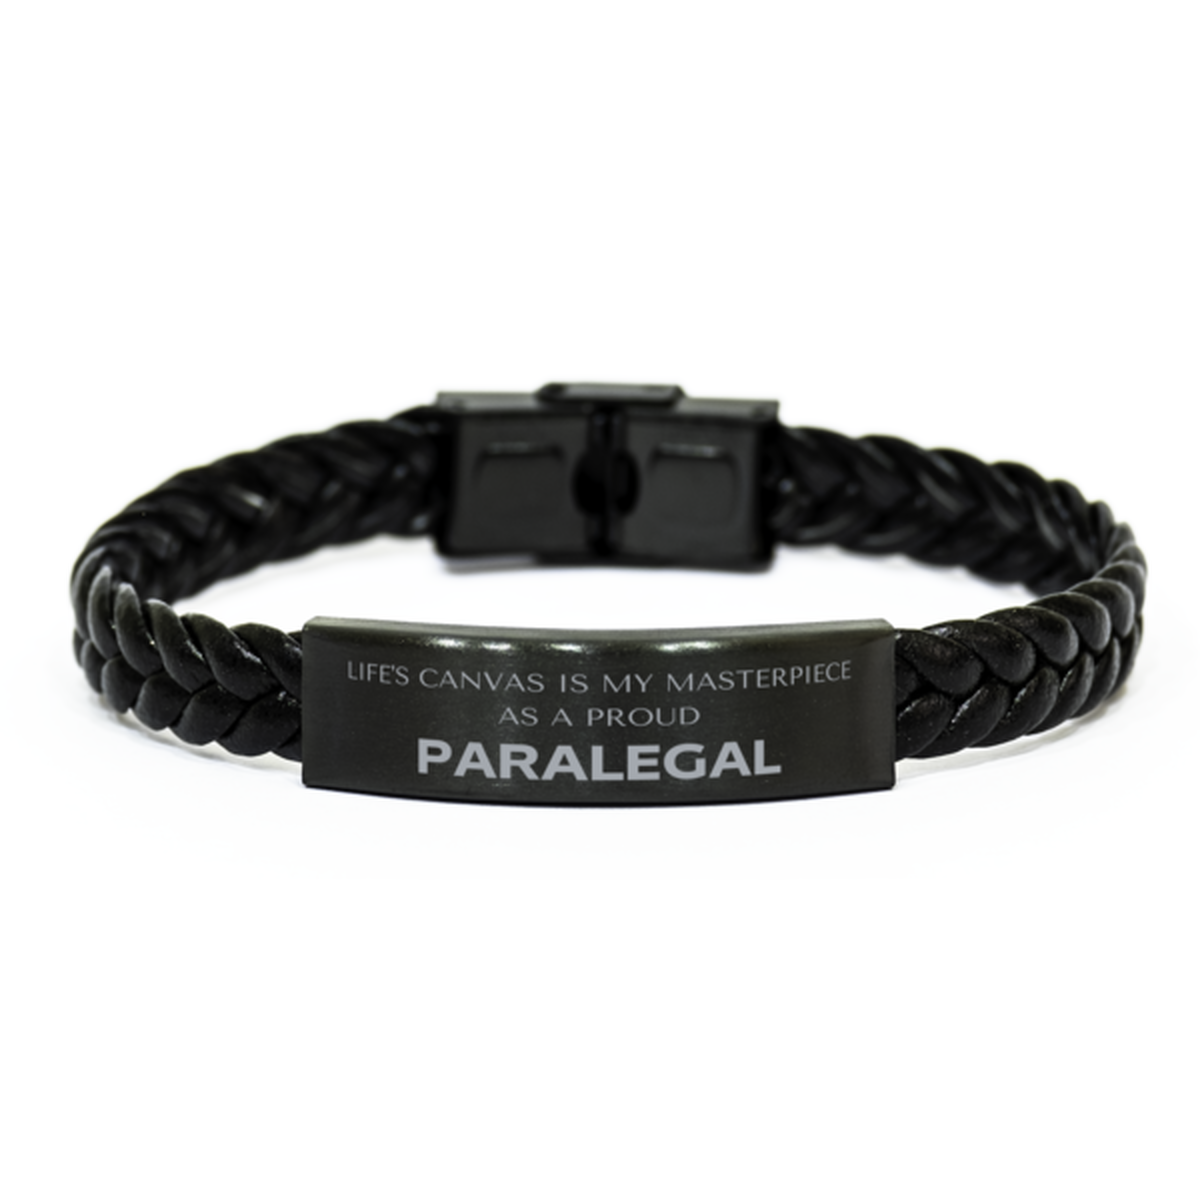 Proud Paralegal Gifts, Life's canvas is my masterpiece, Epic Birthday Christmas Unique Braided Leather Bracelet For Paralegal, Coworkers, Men, Women, Friends